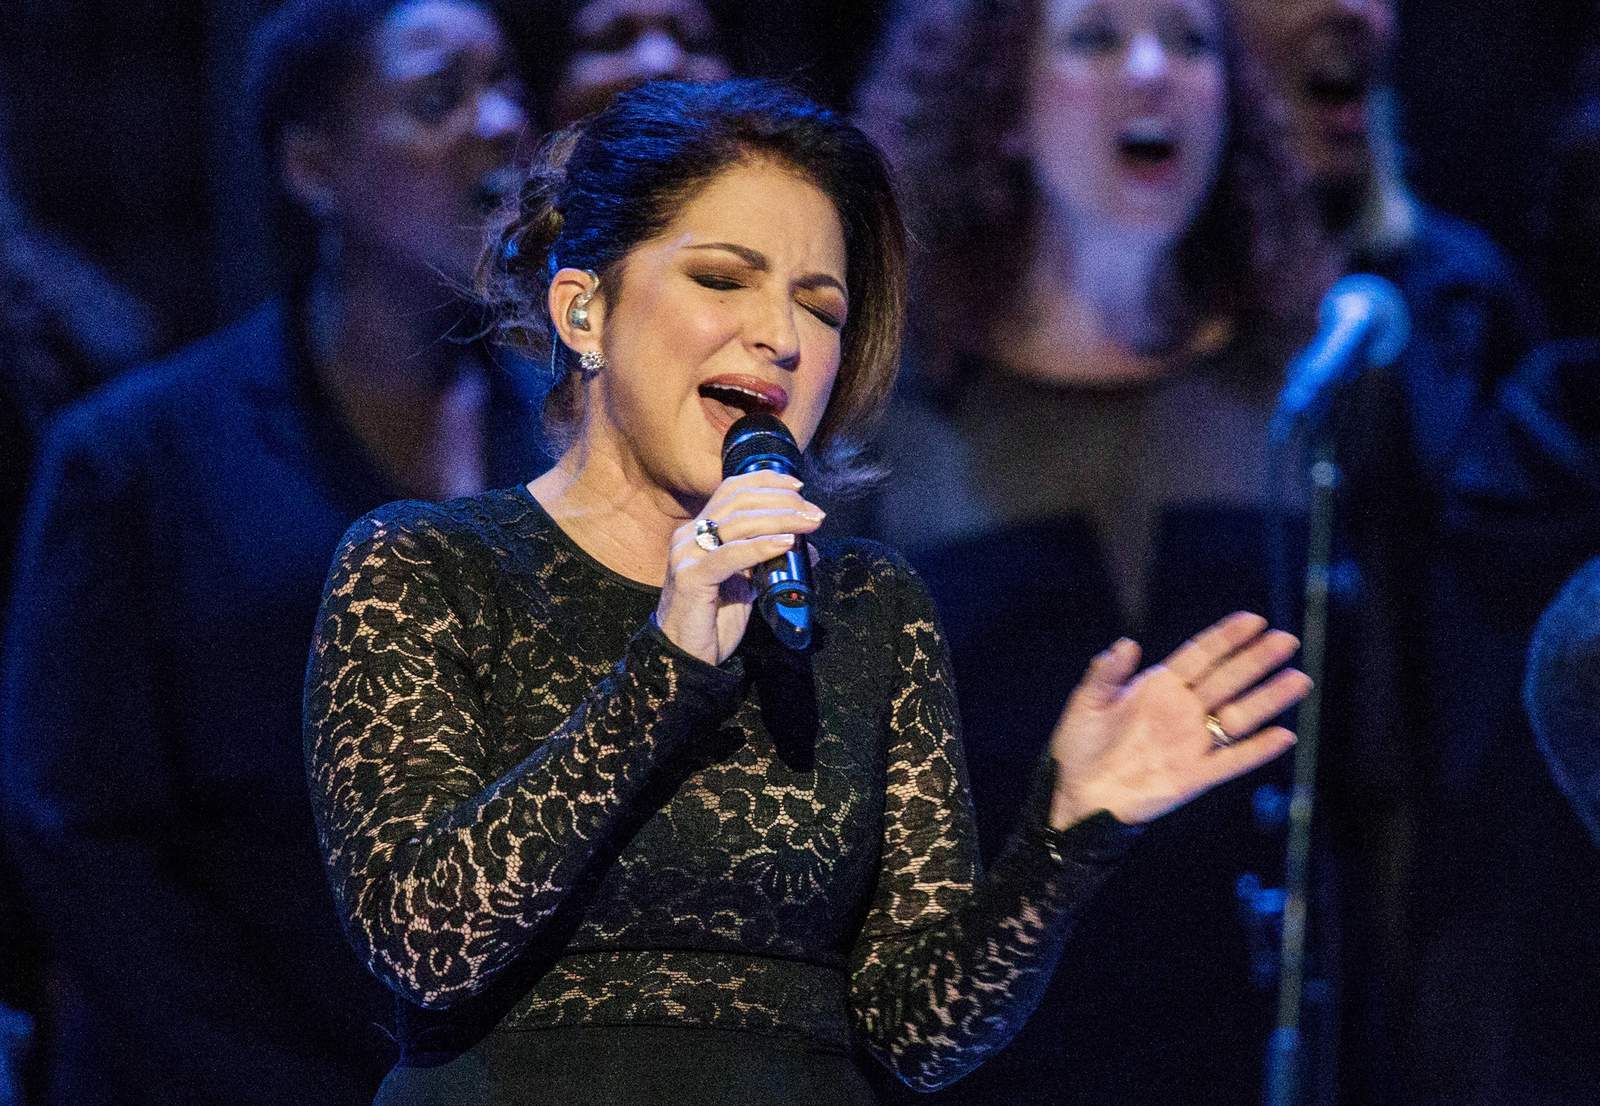 Gloria Estefan reveals she caught COVID-19, is now recovered